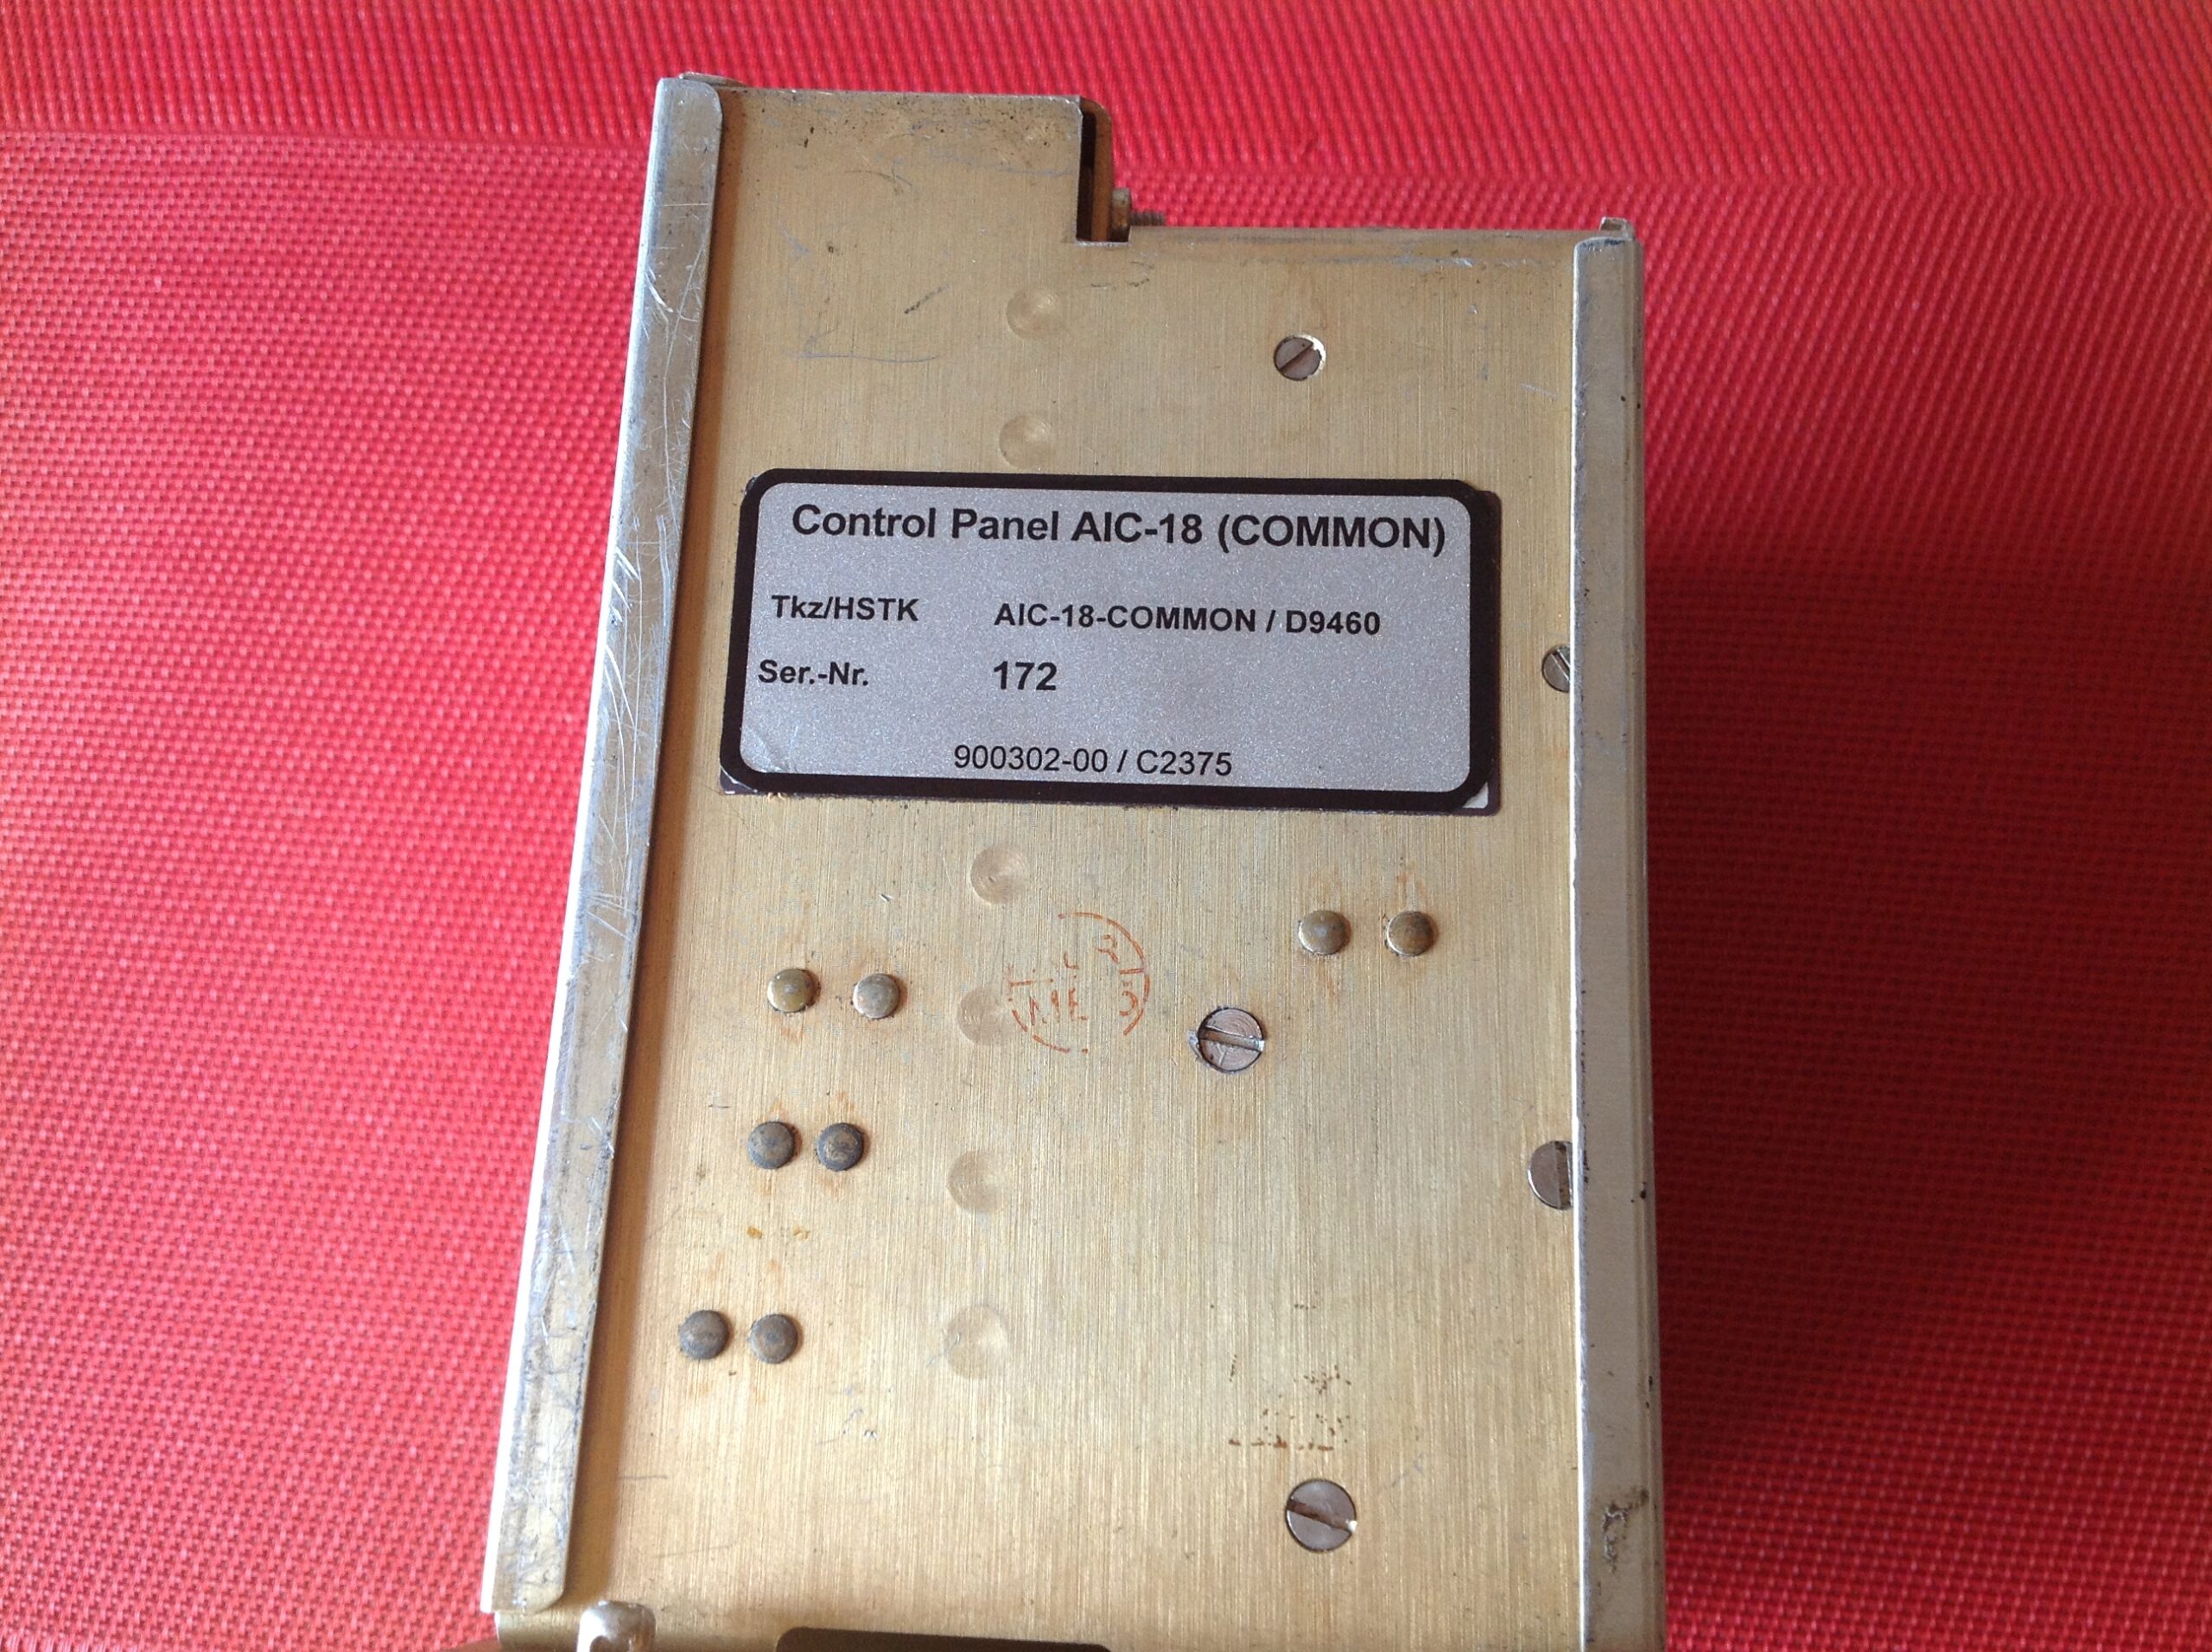 Control Panel, Bediengerät AN- AIC-18 ( Common ) vom Transporthubschrauber CH-53